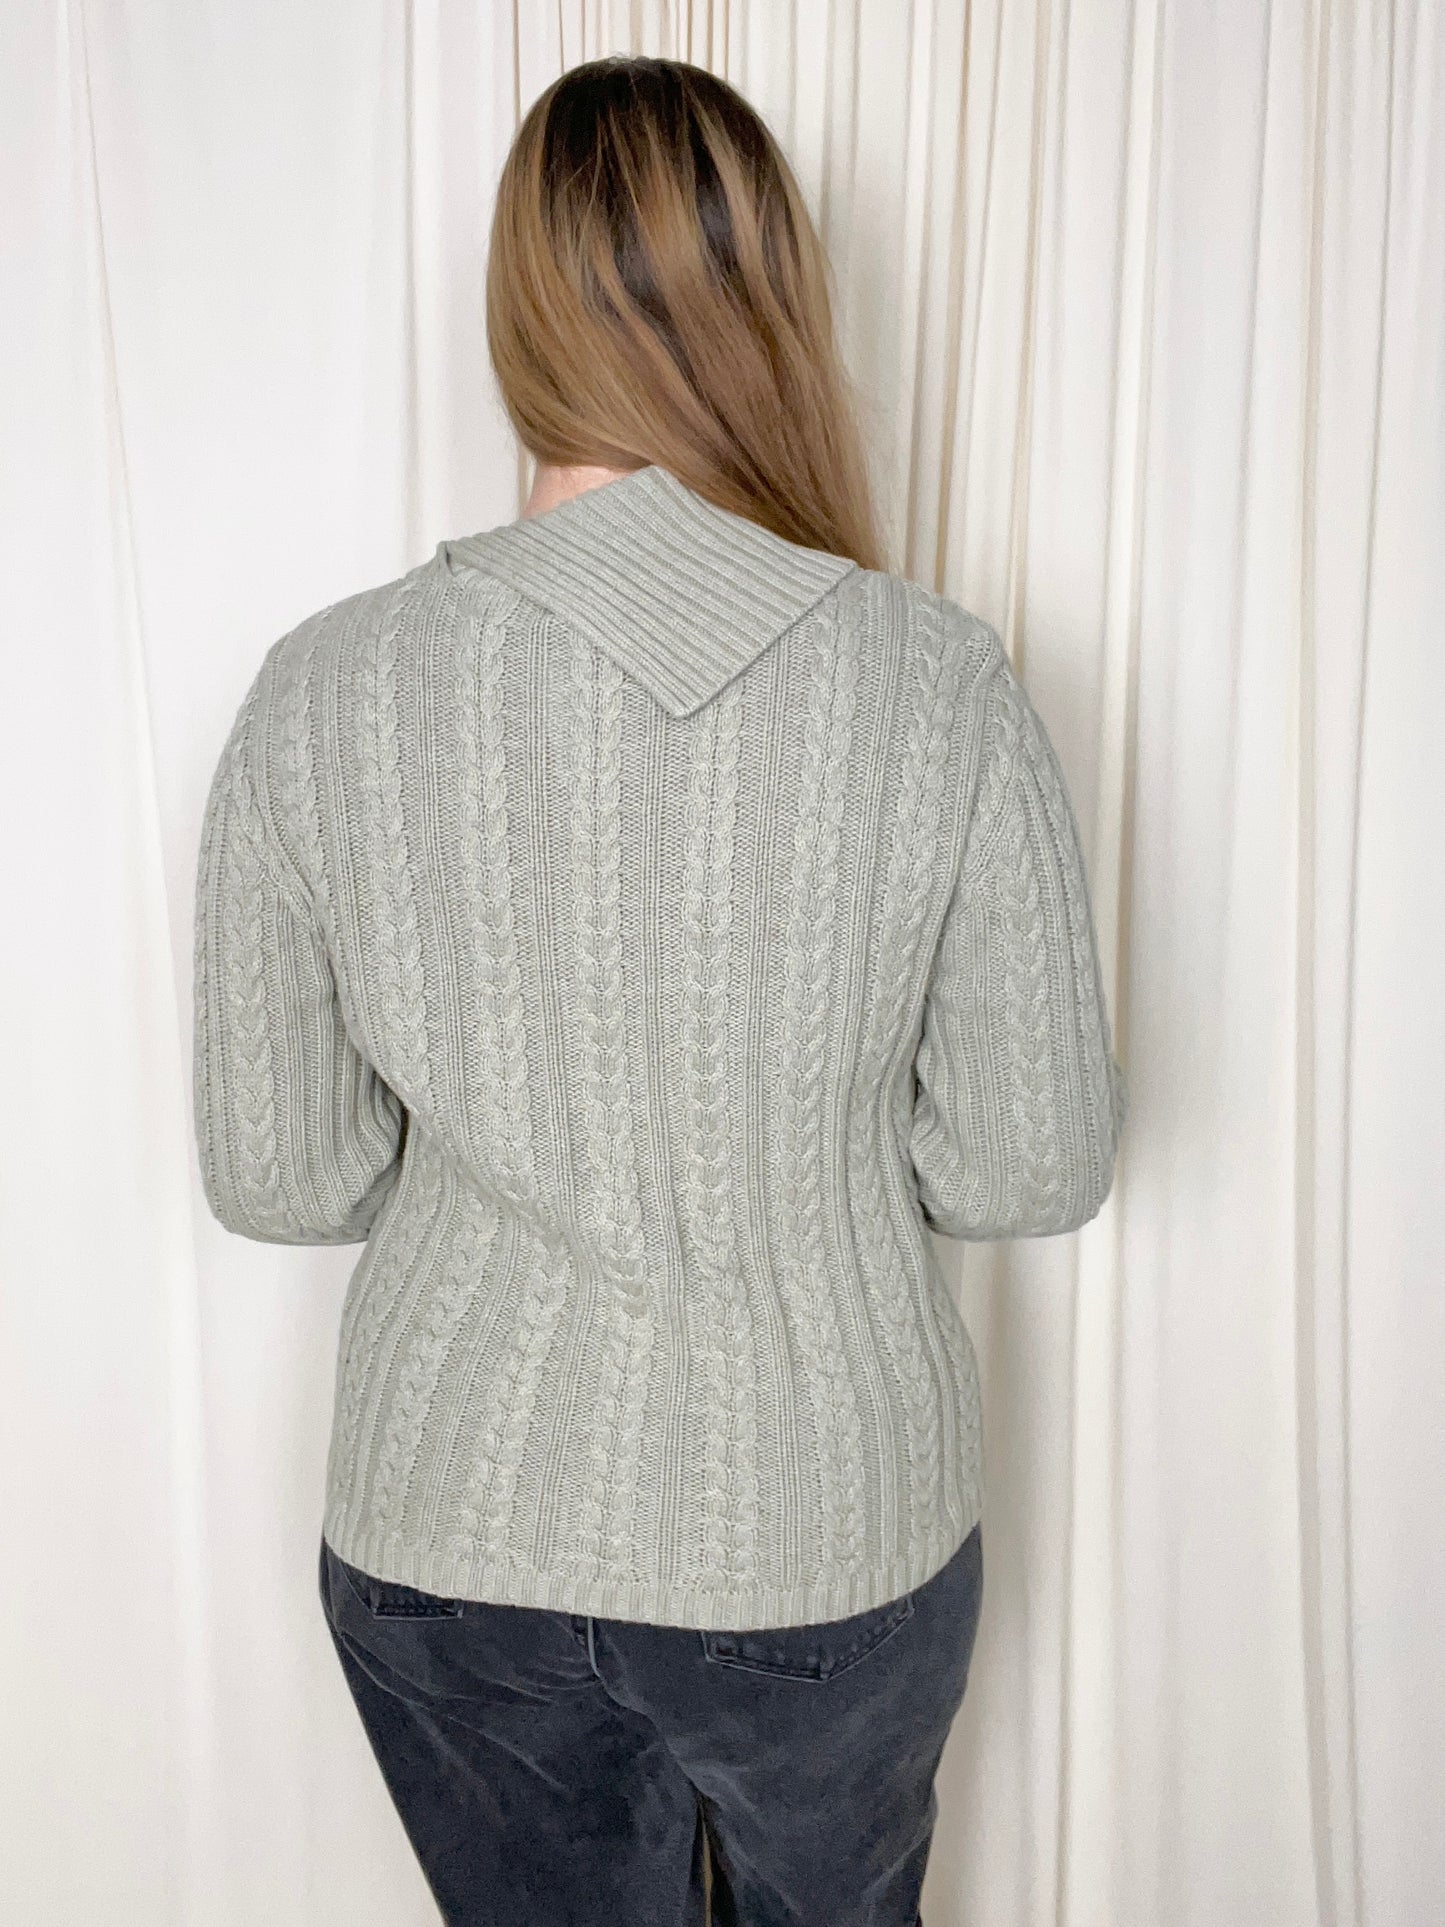 Green Cable Knit Sweater - Medium